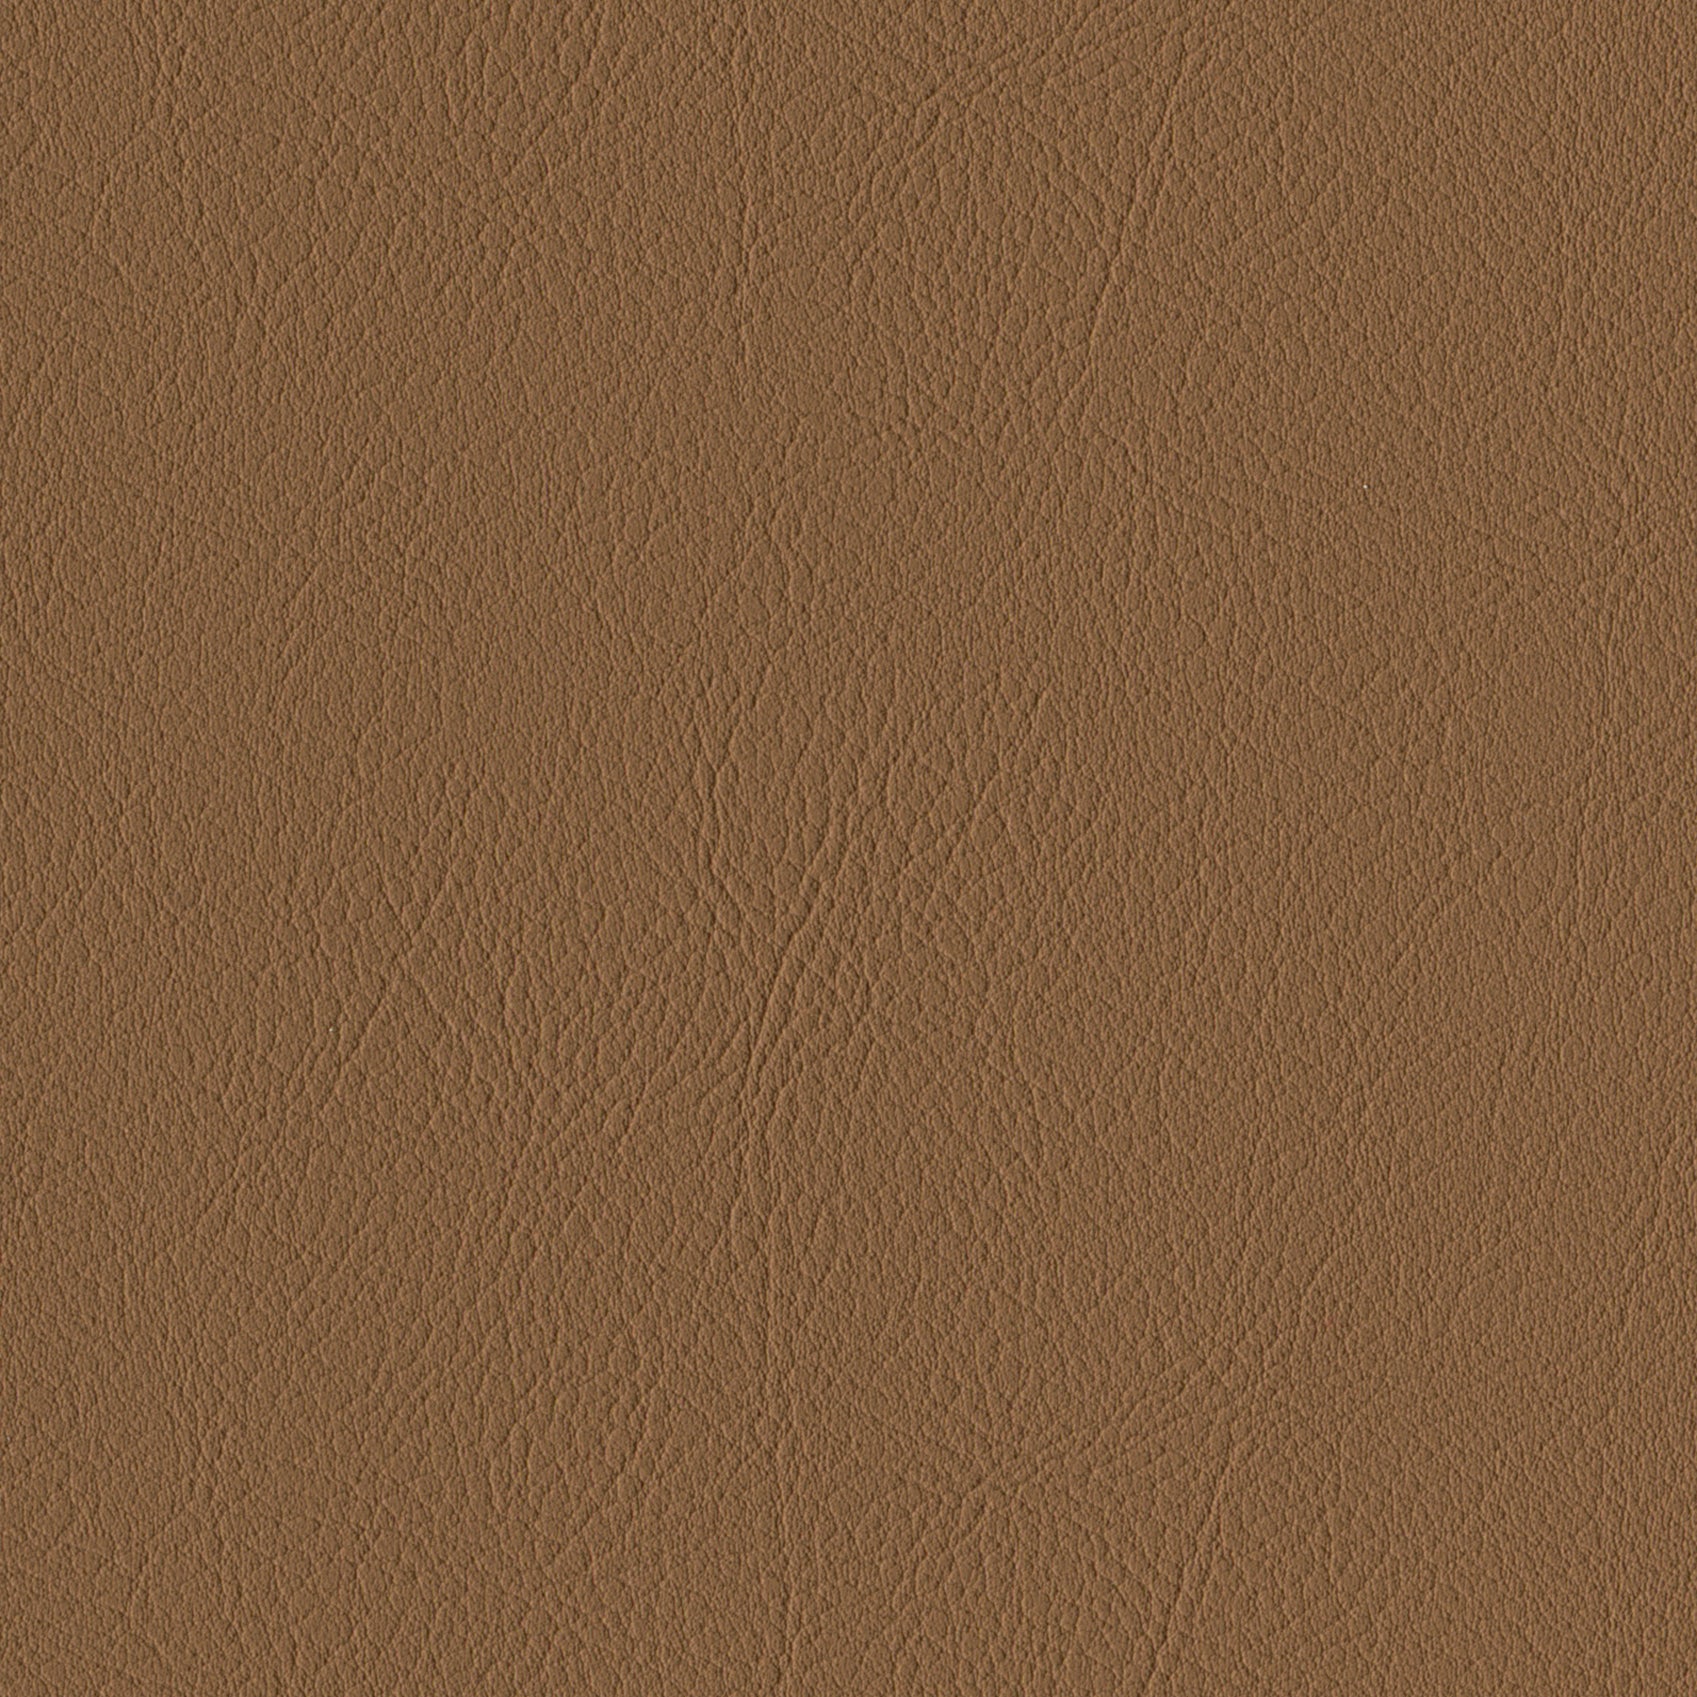    Andriali-Contract-Vinyl_Upholstery-Design-LegacyFR-Color-321AntiquarianBrown-Width-140cm